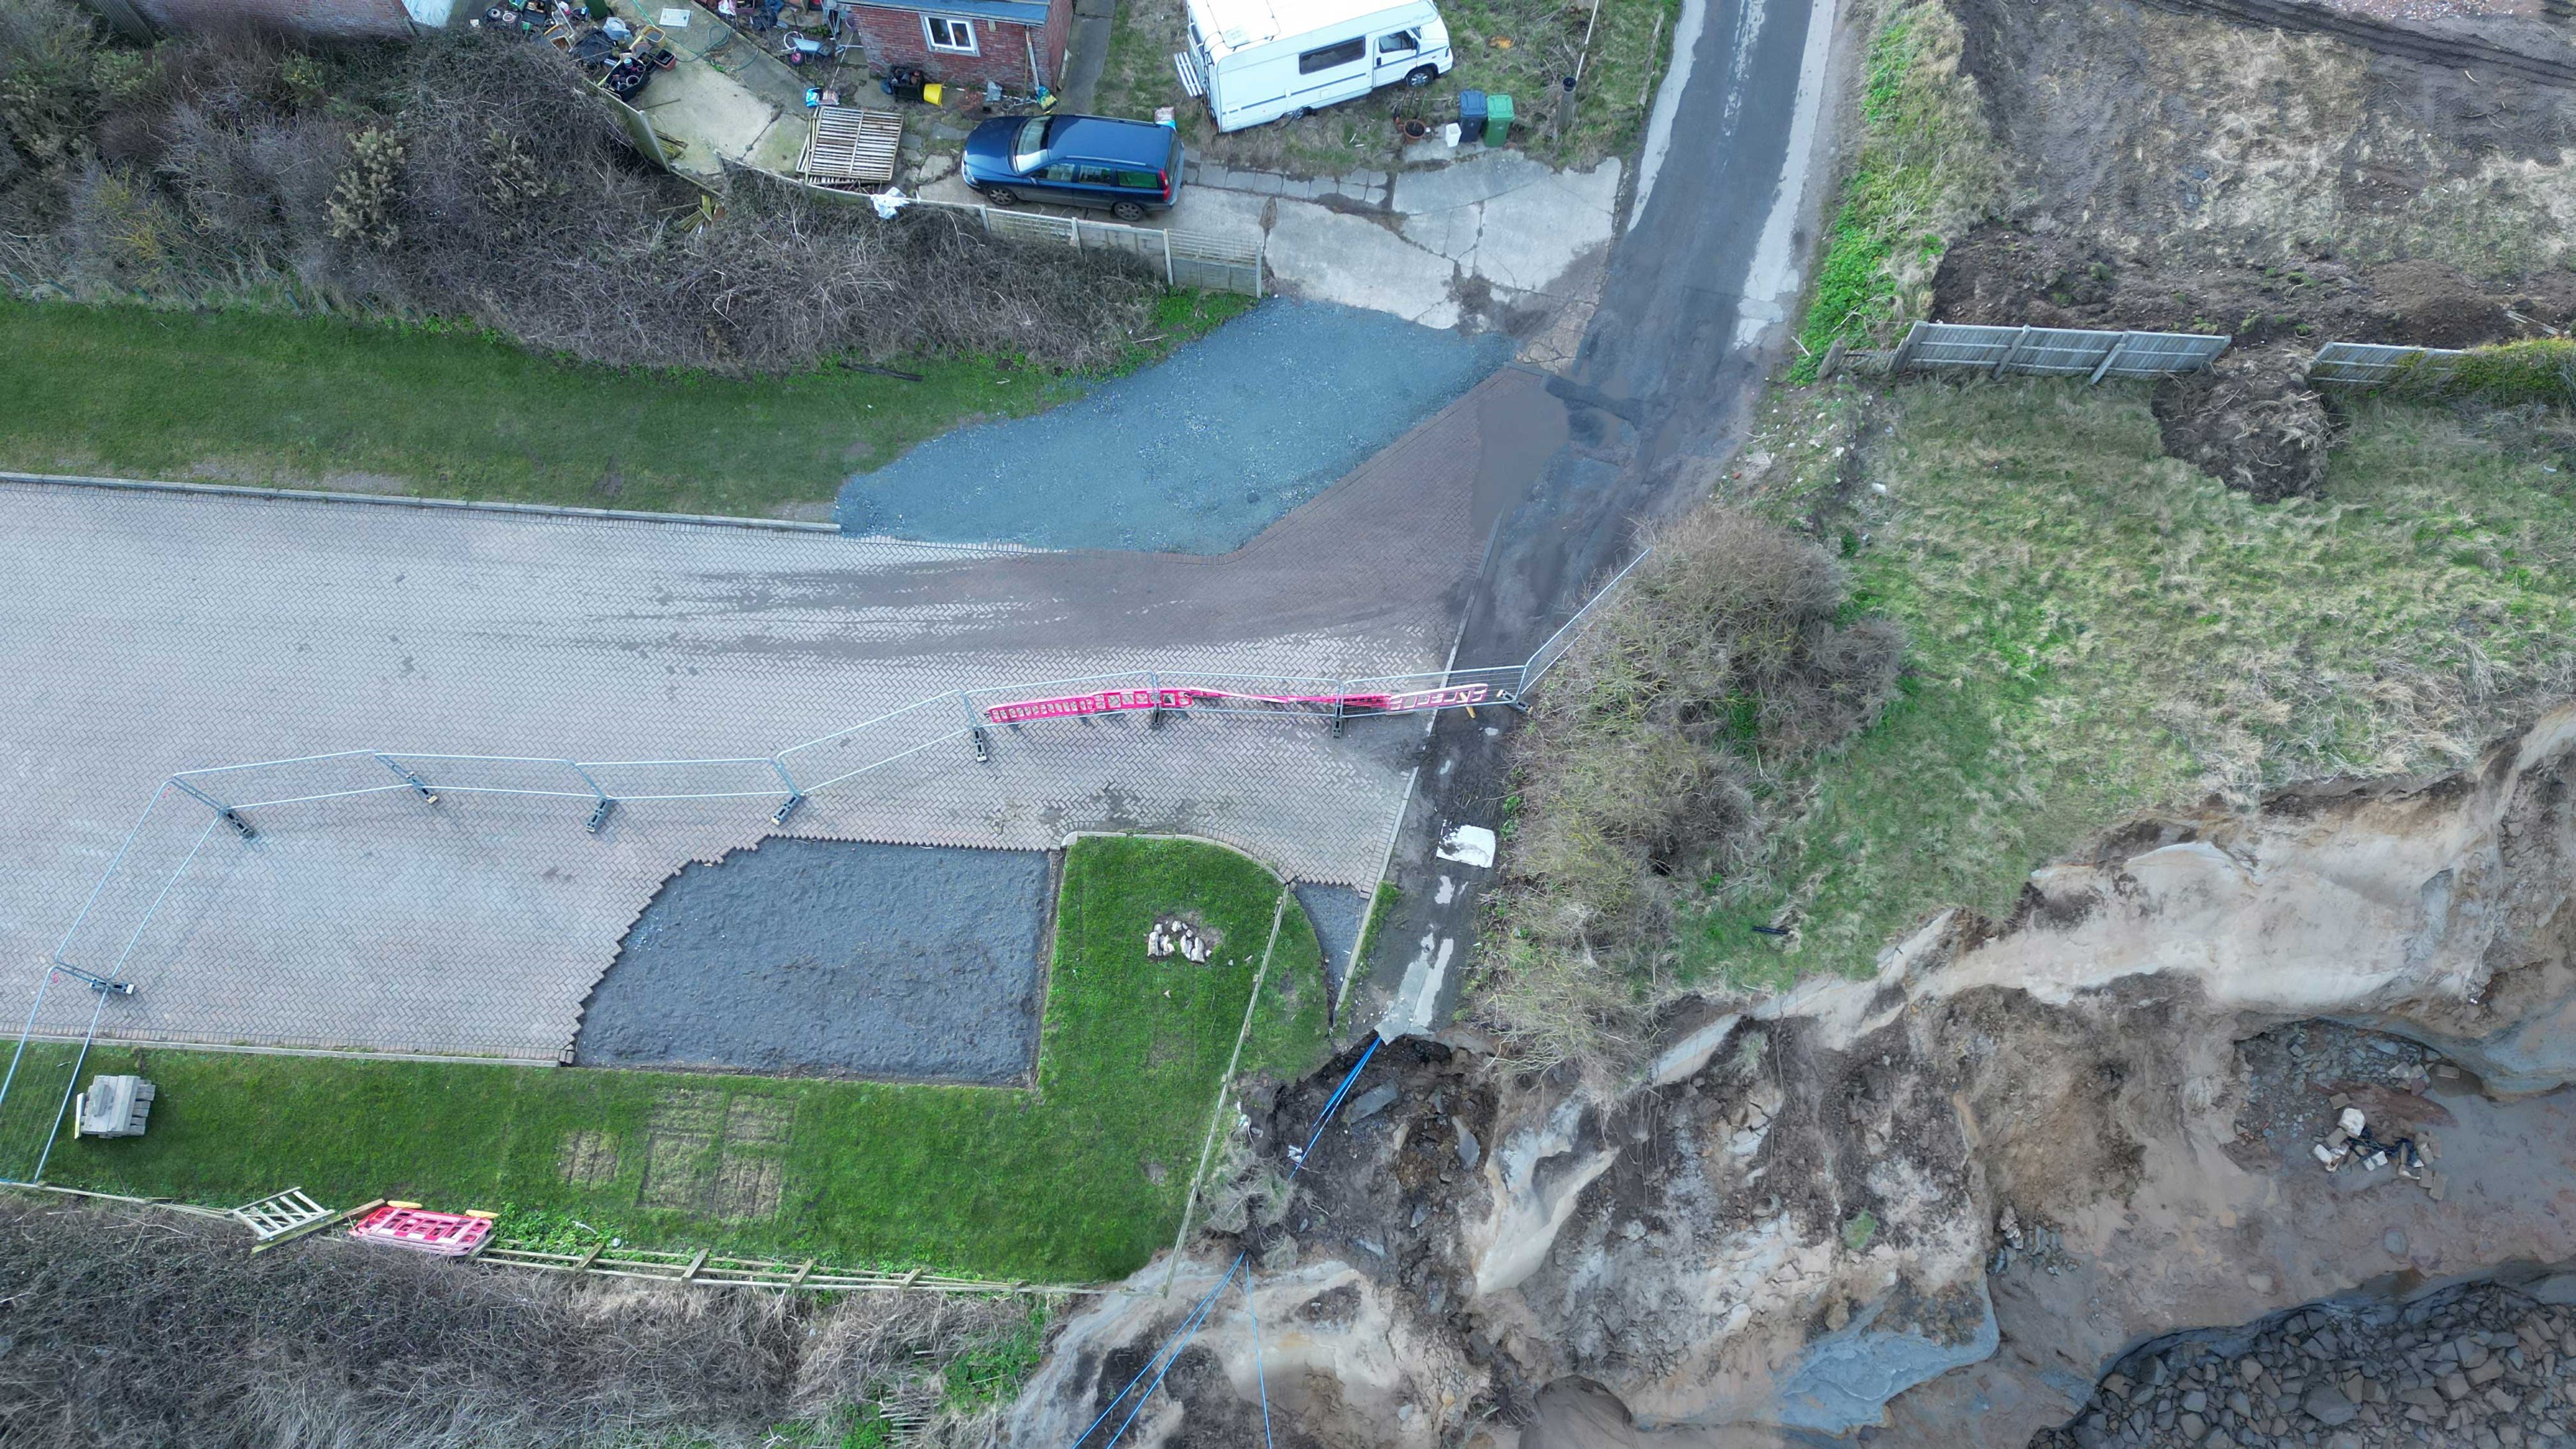 Beach Road at Happisburgh, showing the road has been redirected through the neighbouring property exterior garden.